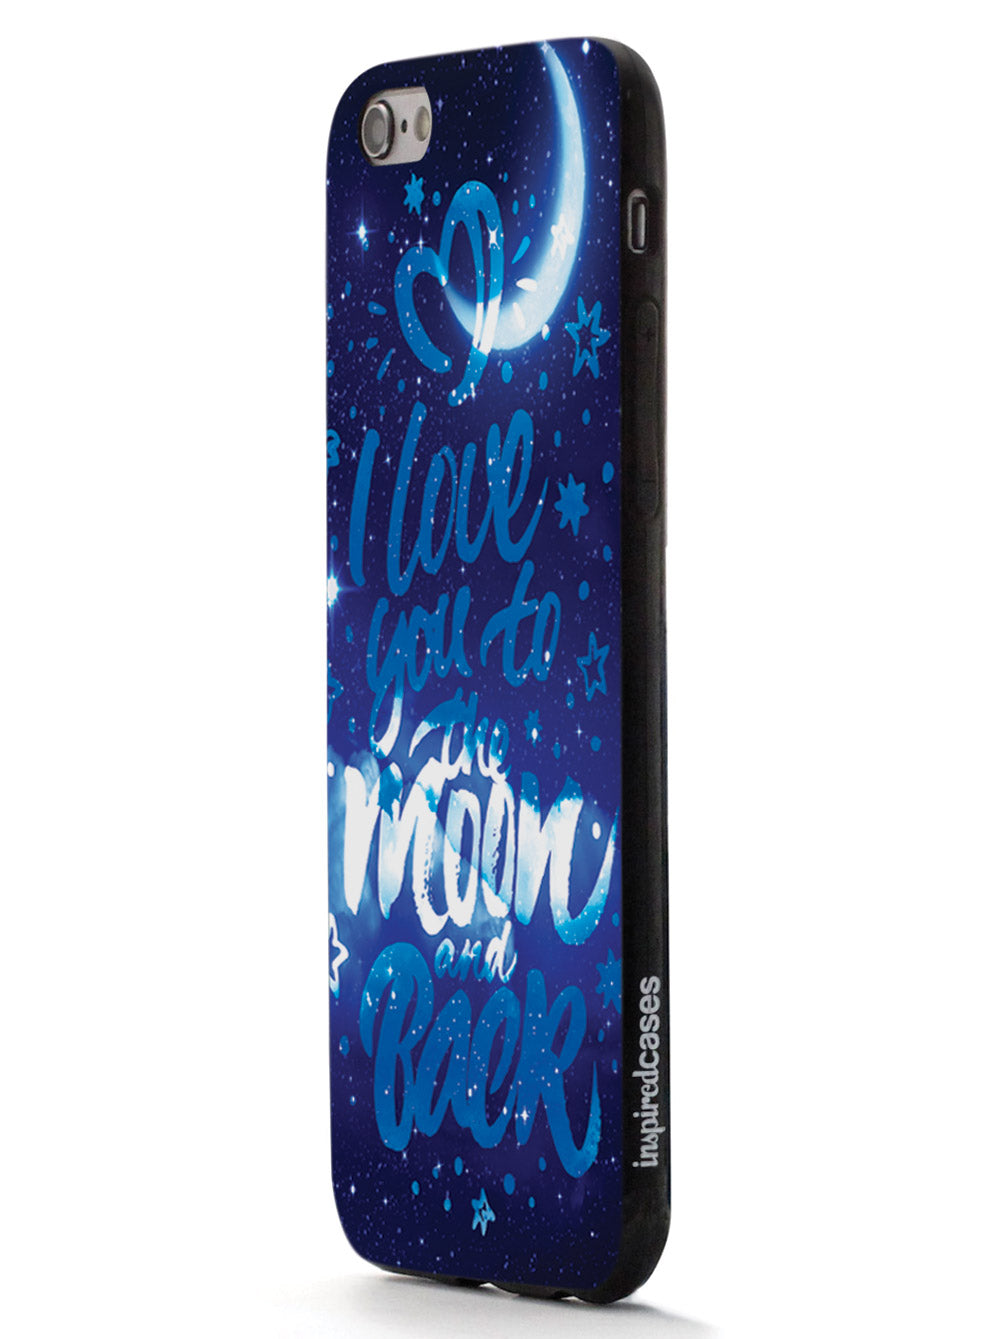 Starry Night - I Love You to the Moon and Back - Black Case